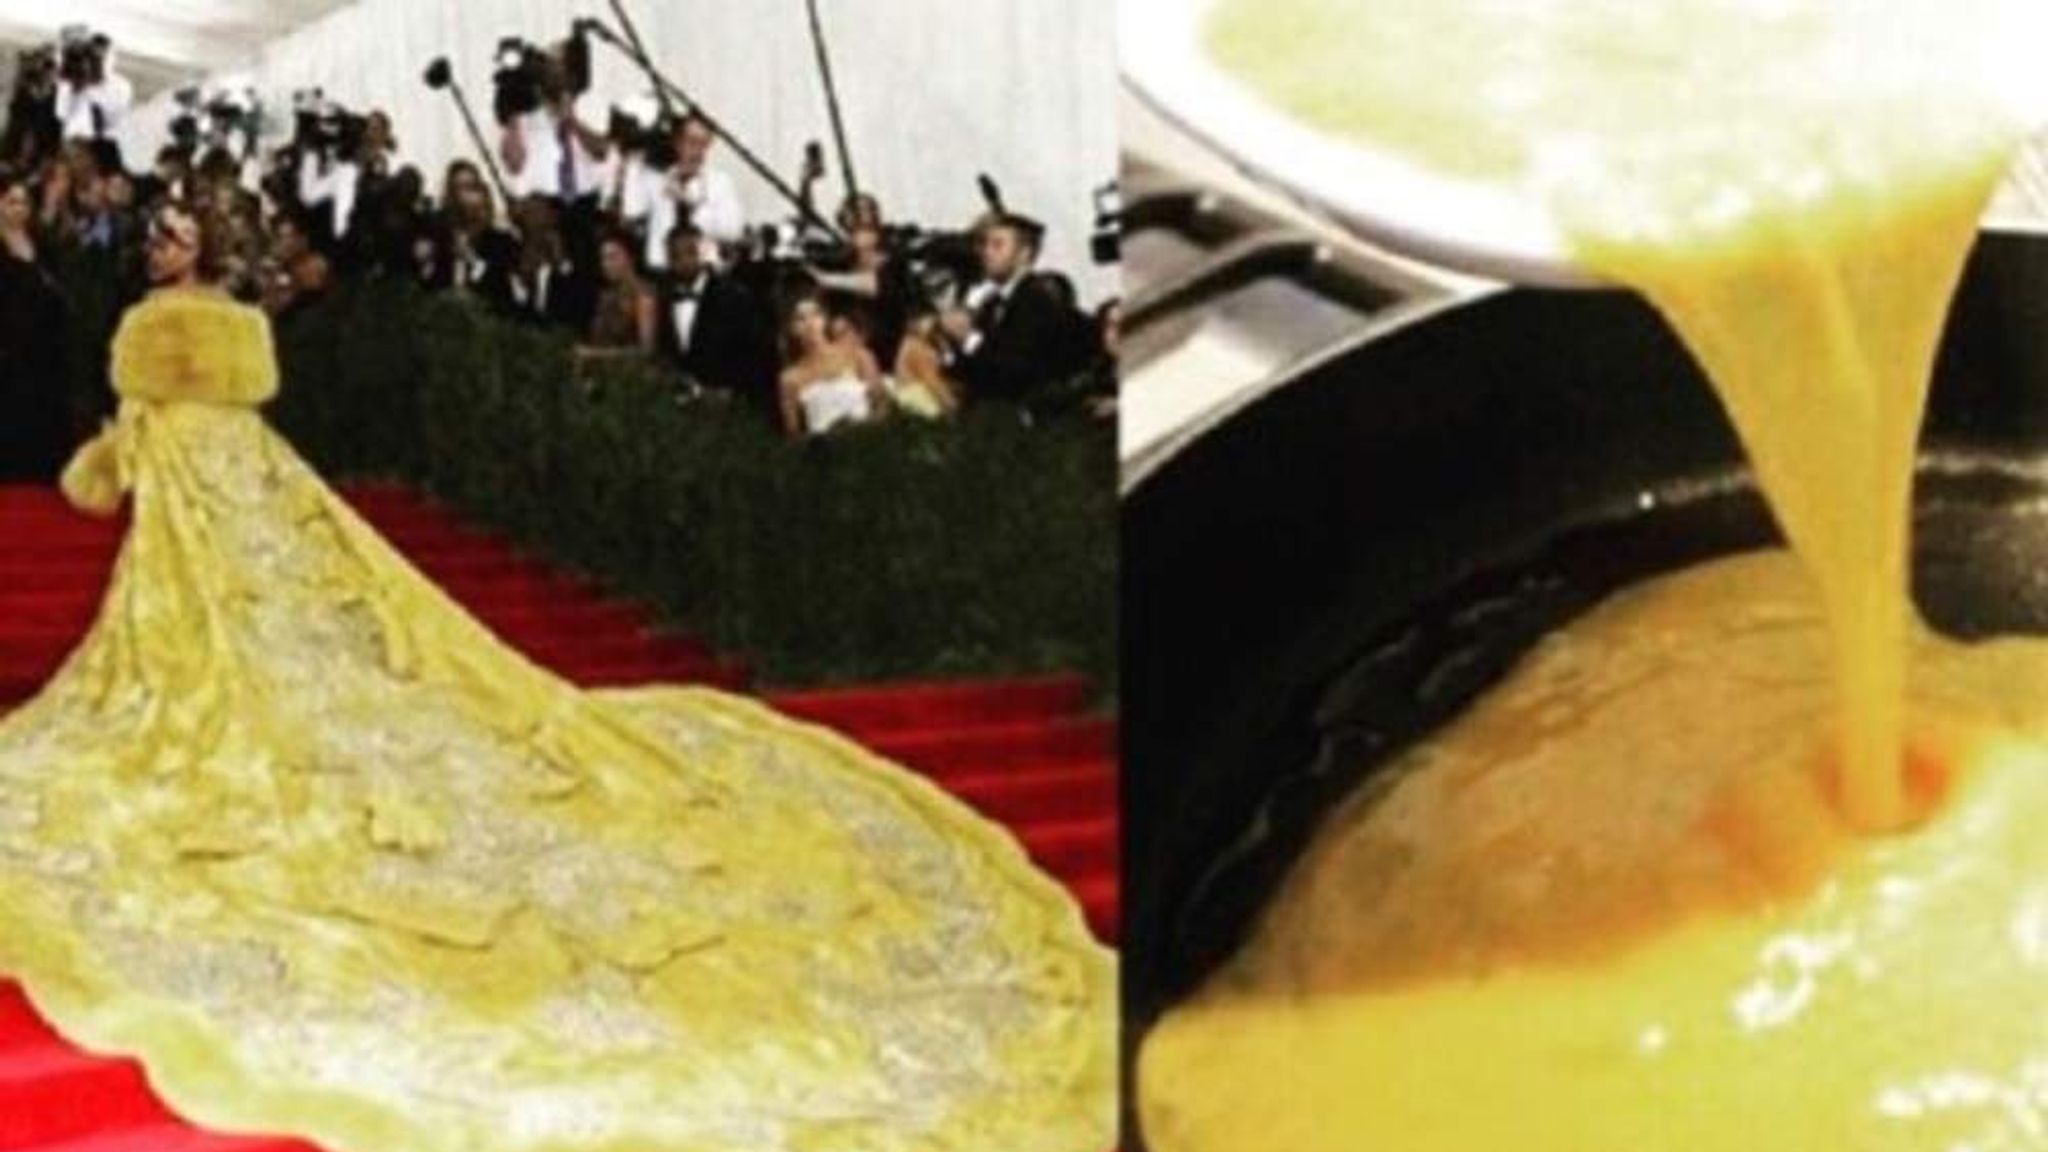 Guo Pei: the Chinese designer who made Rihanna's omelette dress, Fashion